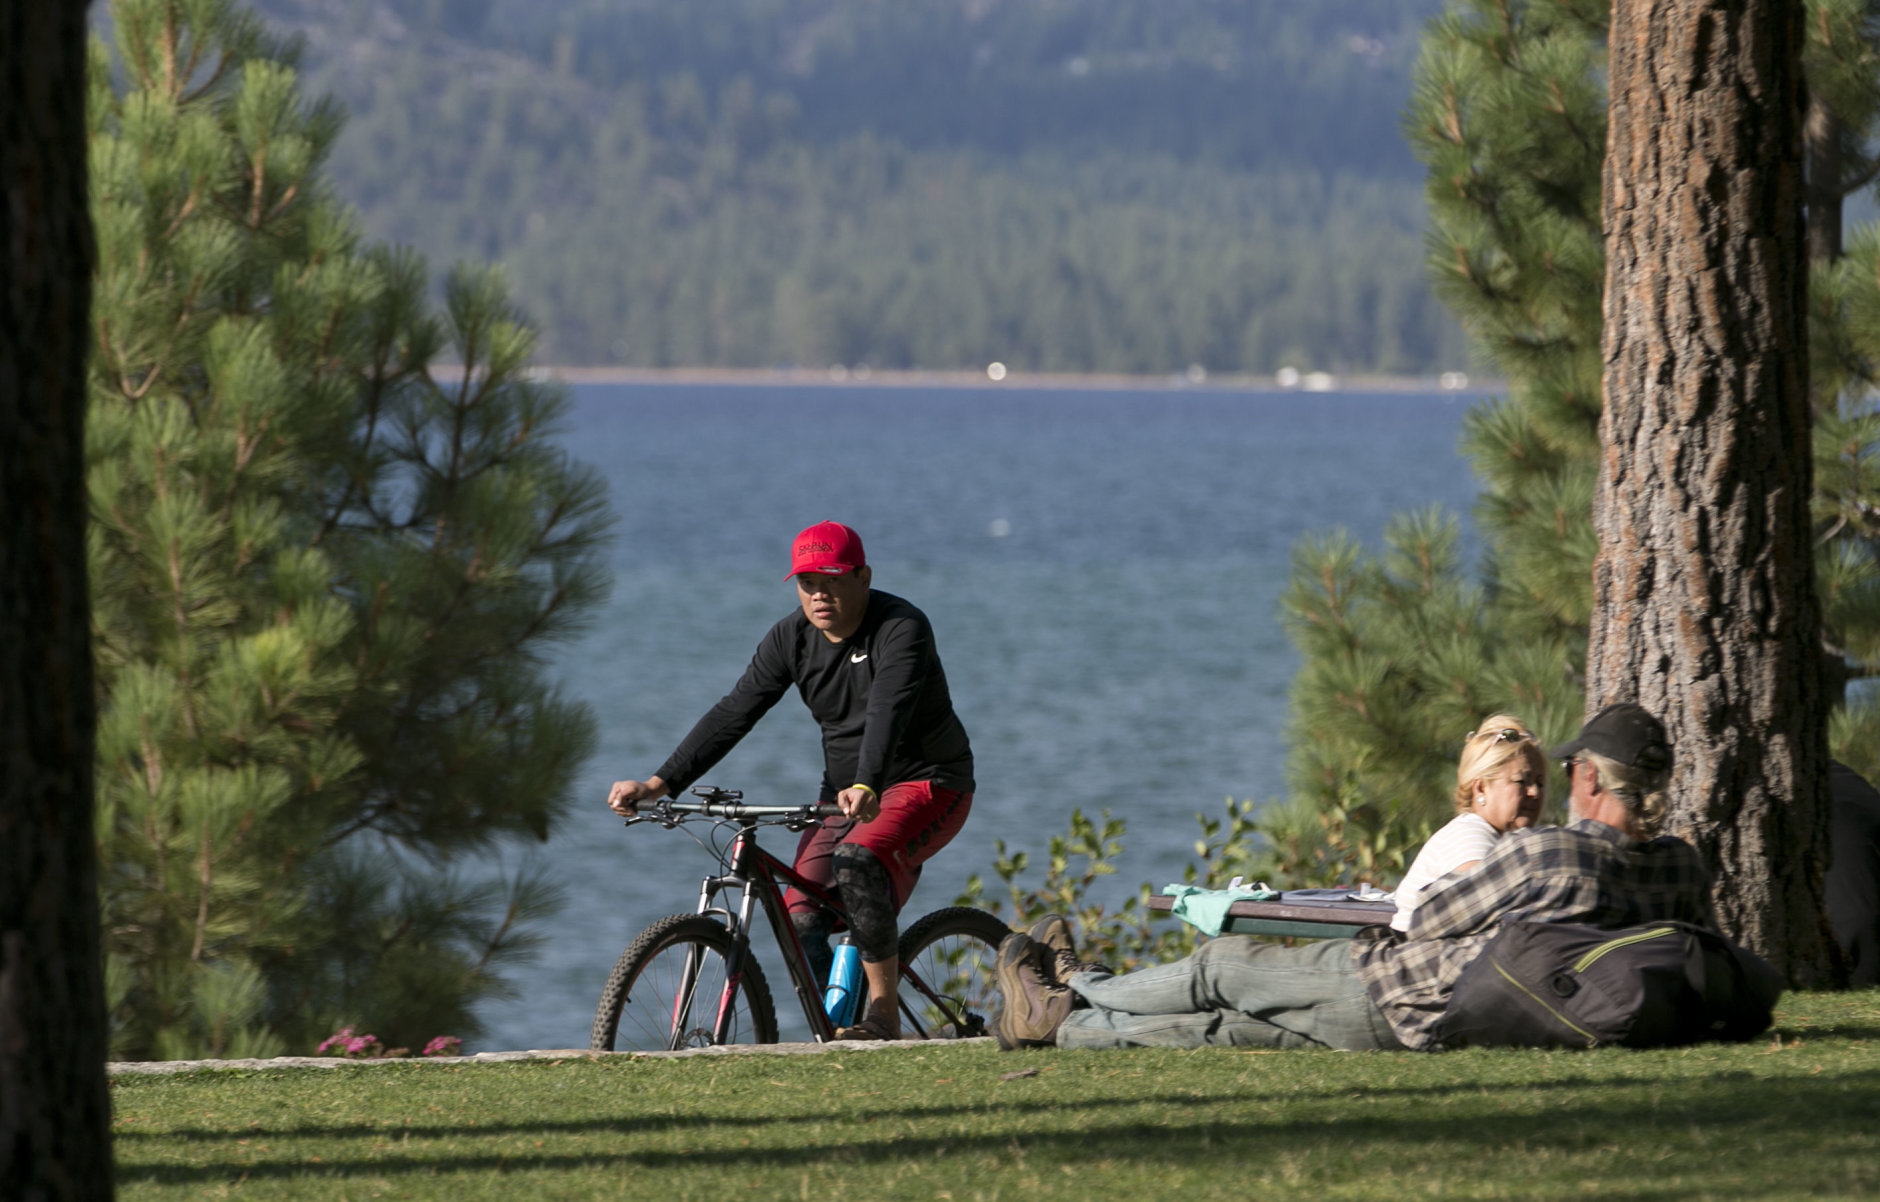 In this photo taken Tuesday, Aug. 8, 2017, a bicyclist rides down a path along the south shore of Lake Tahoe, in South Lake Tahoe Calif. (AP Photo/Rich Pedroncelli)